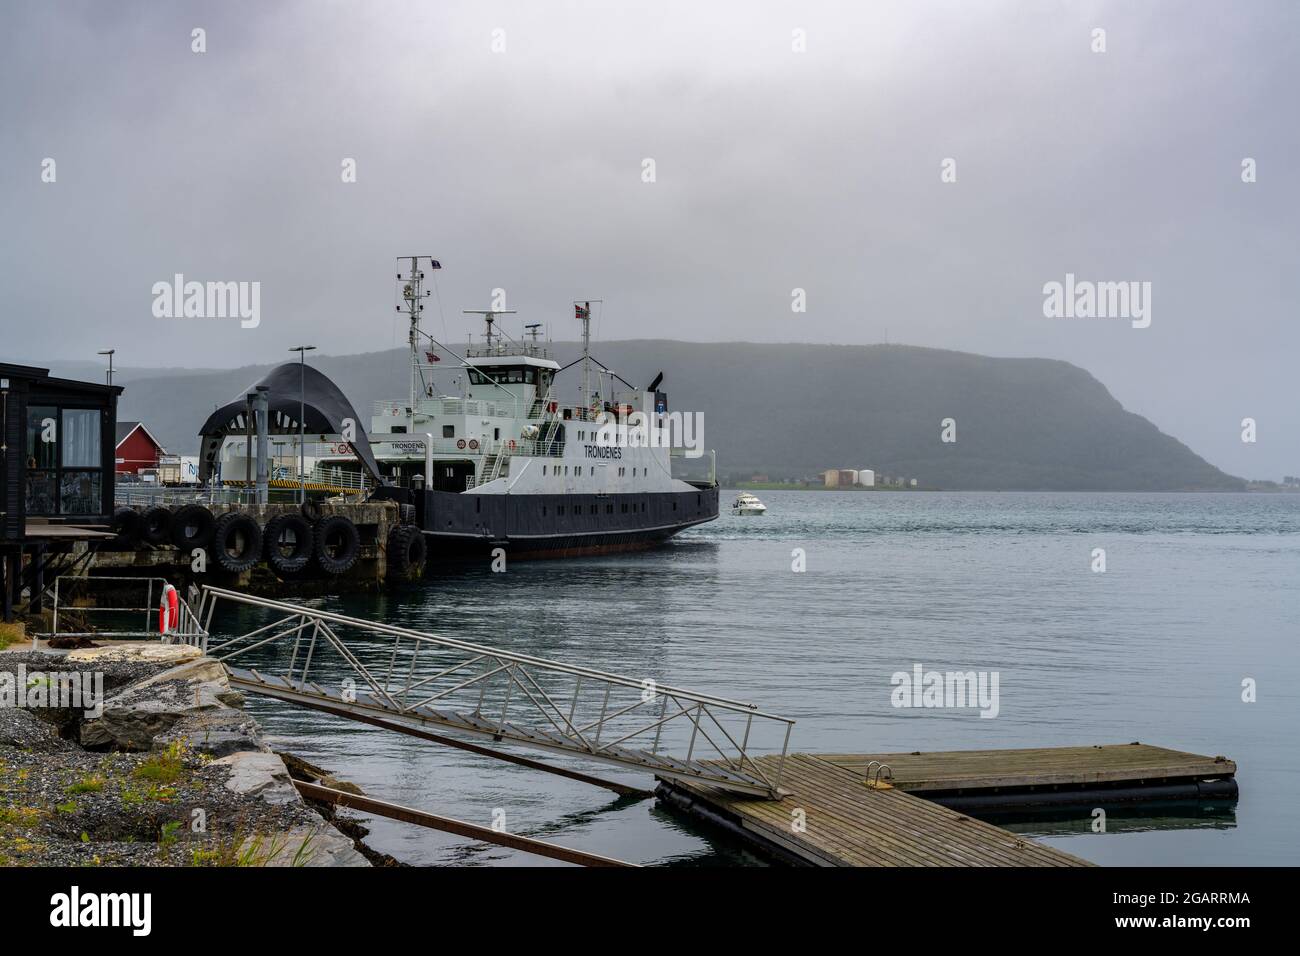 Nesna, Norway - 17 July, 2021: the ferry at the landing in the harbor of Nesna on the Helgeland coast of Norway Stock Photo